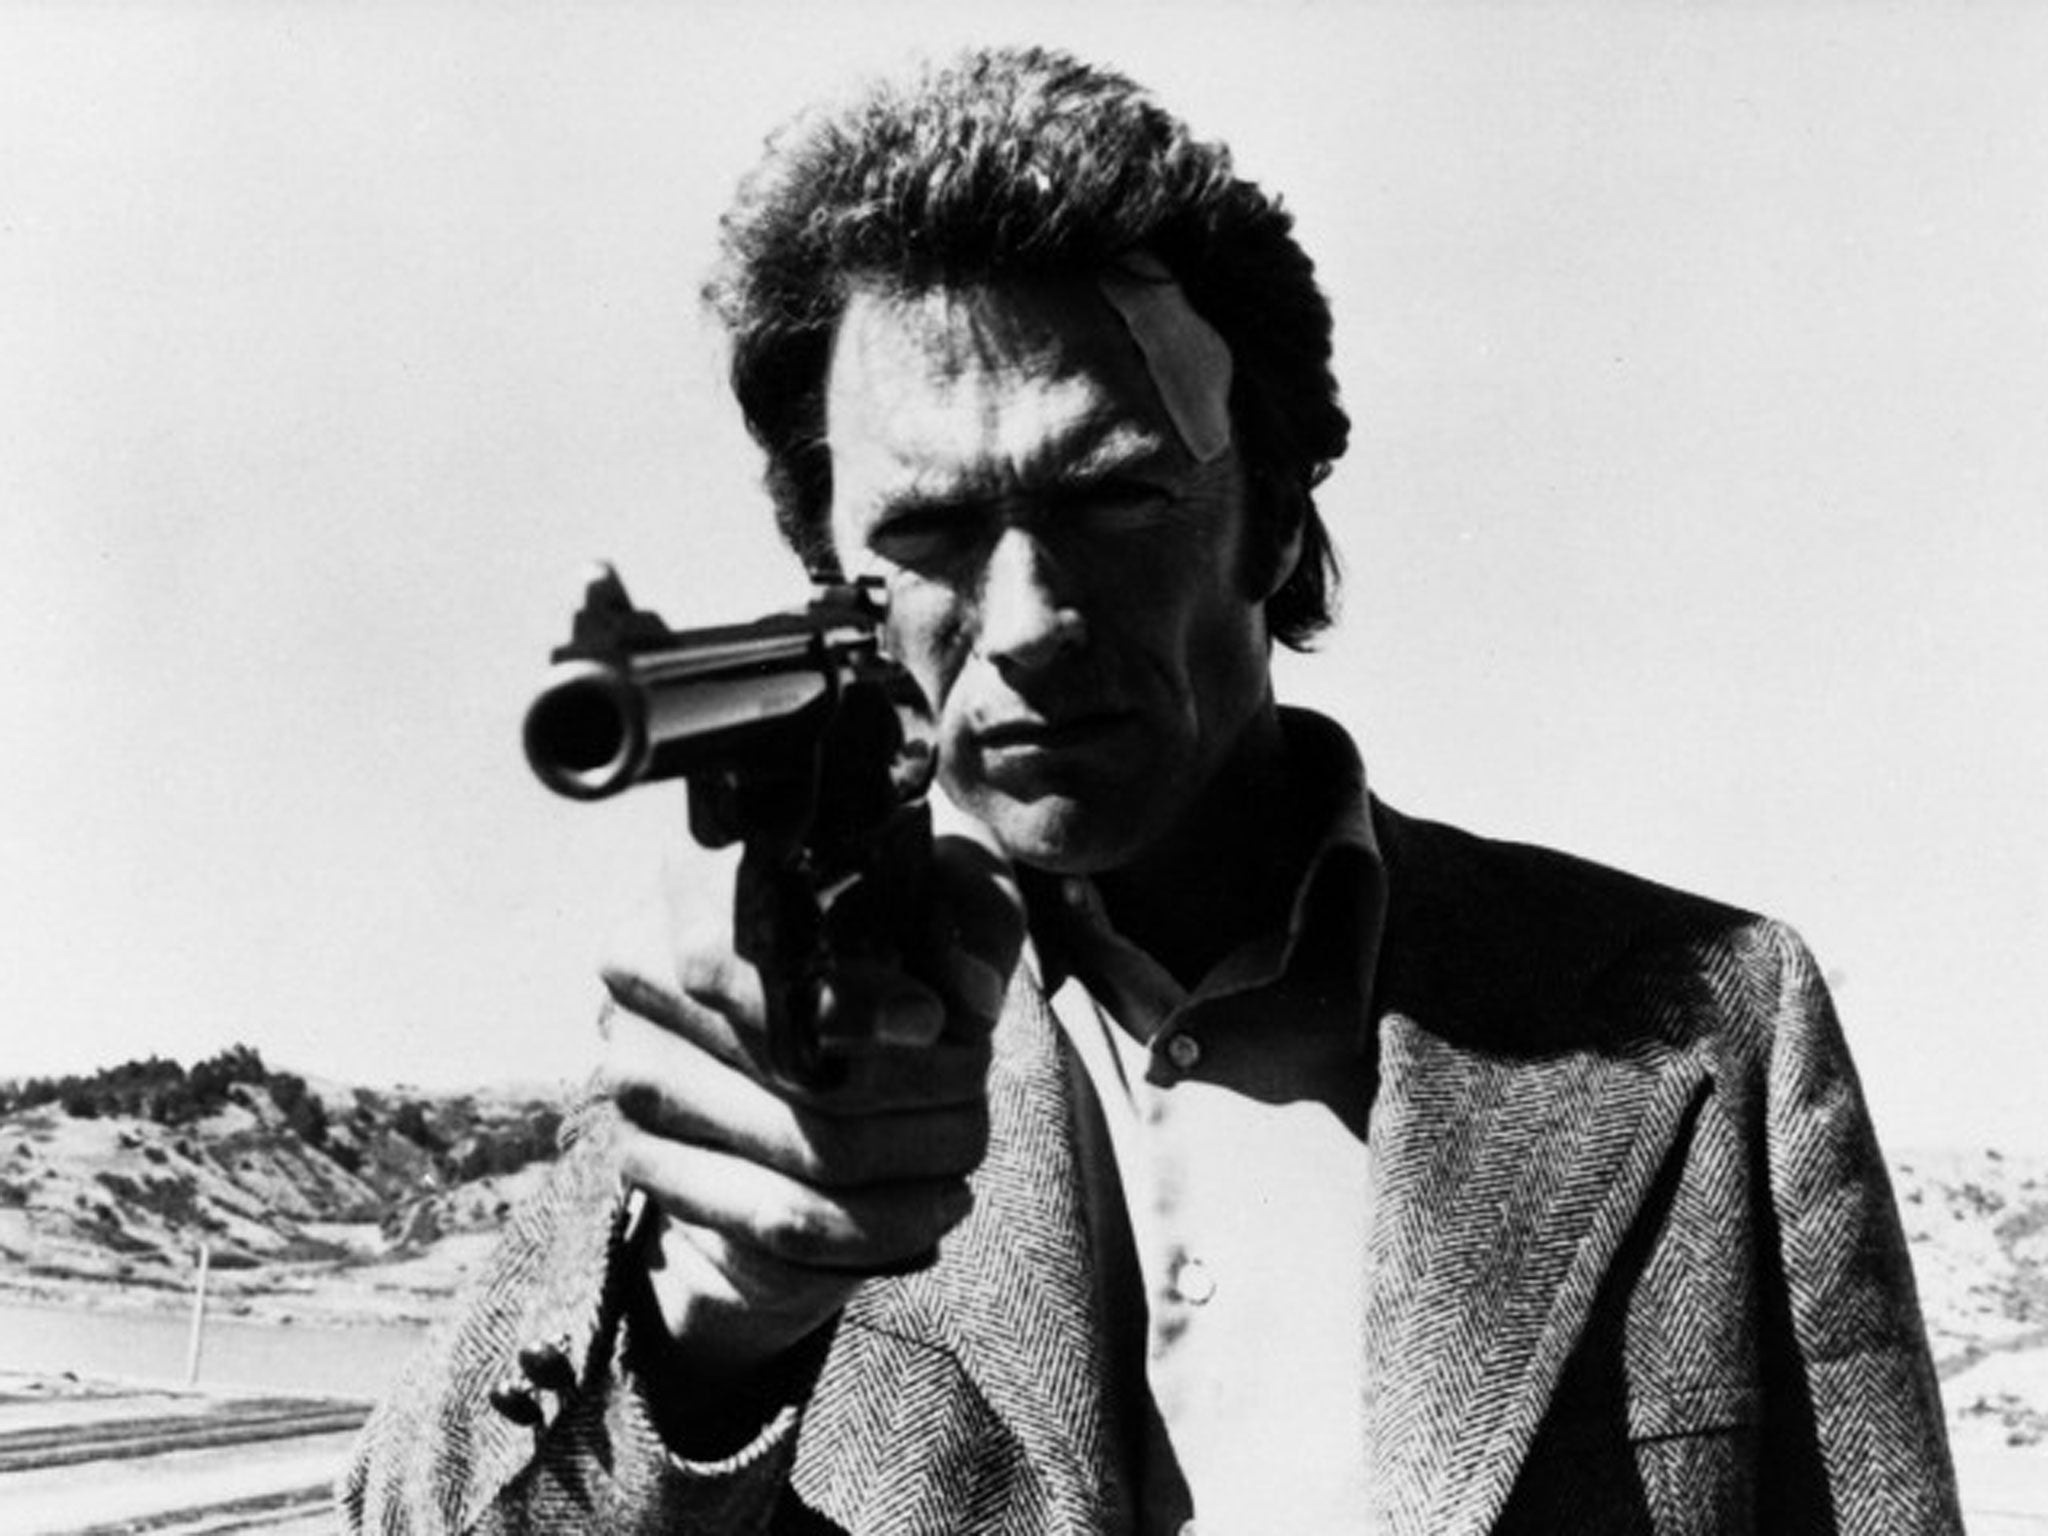 Clint Eastwood with handgun in his Dirty Harry role